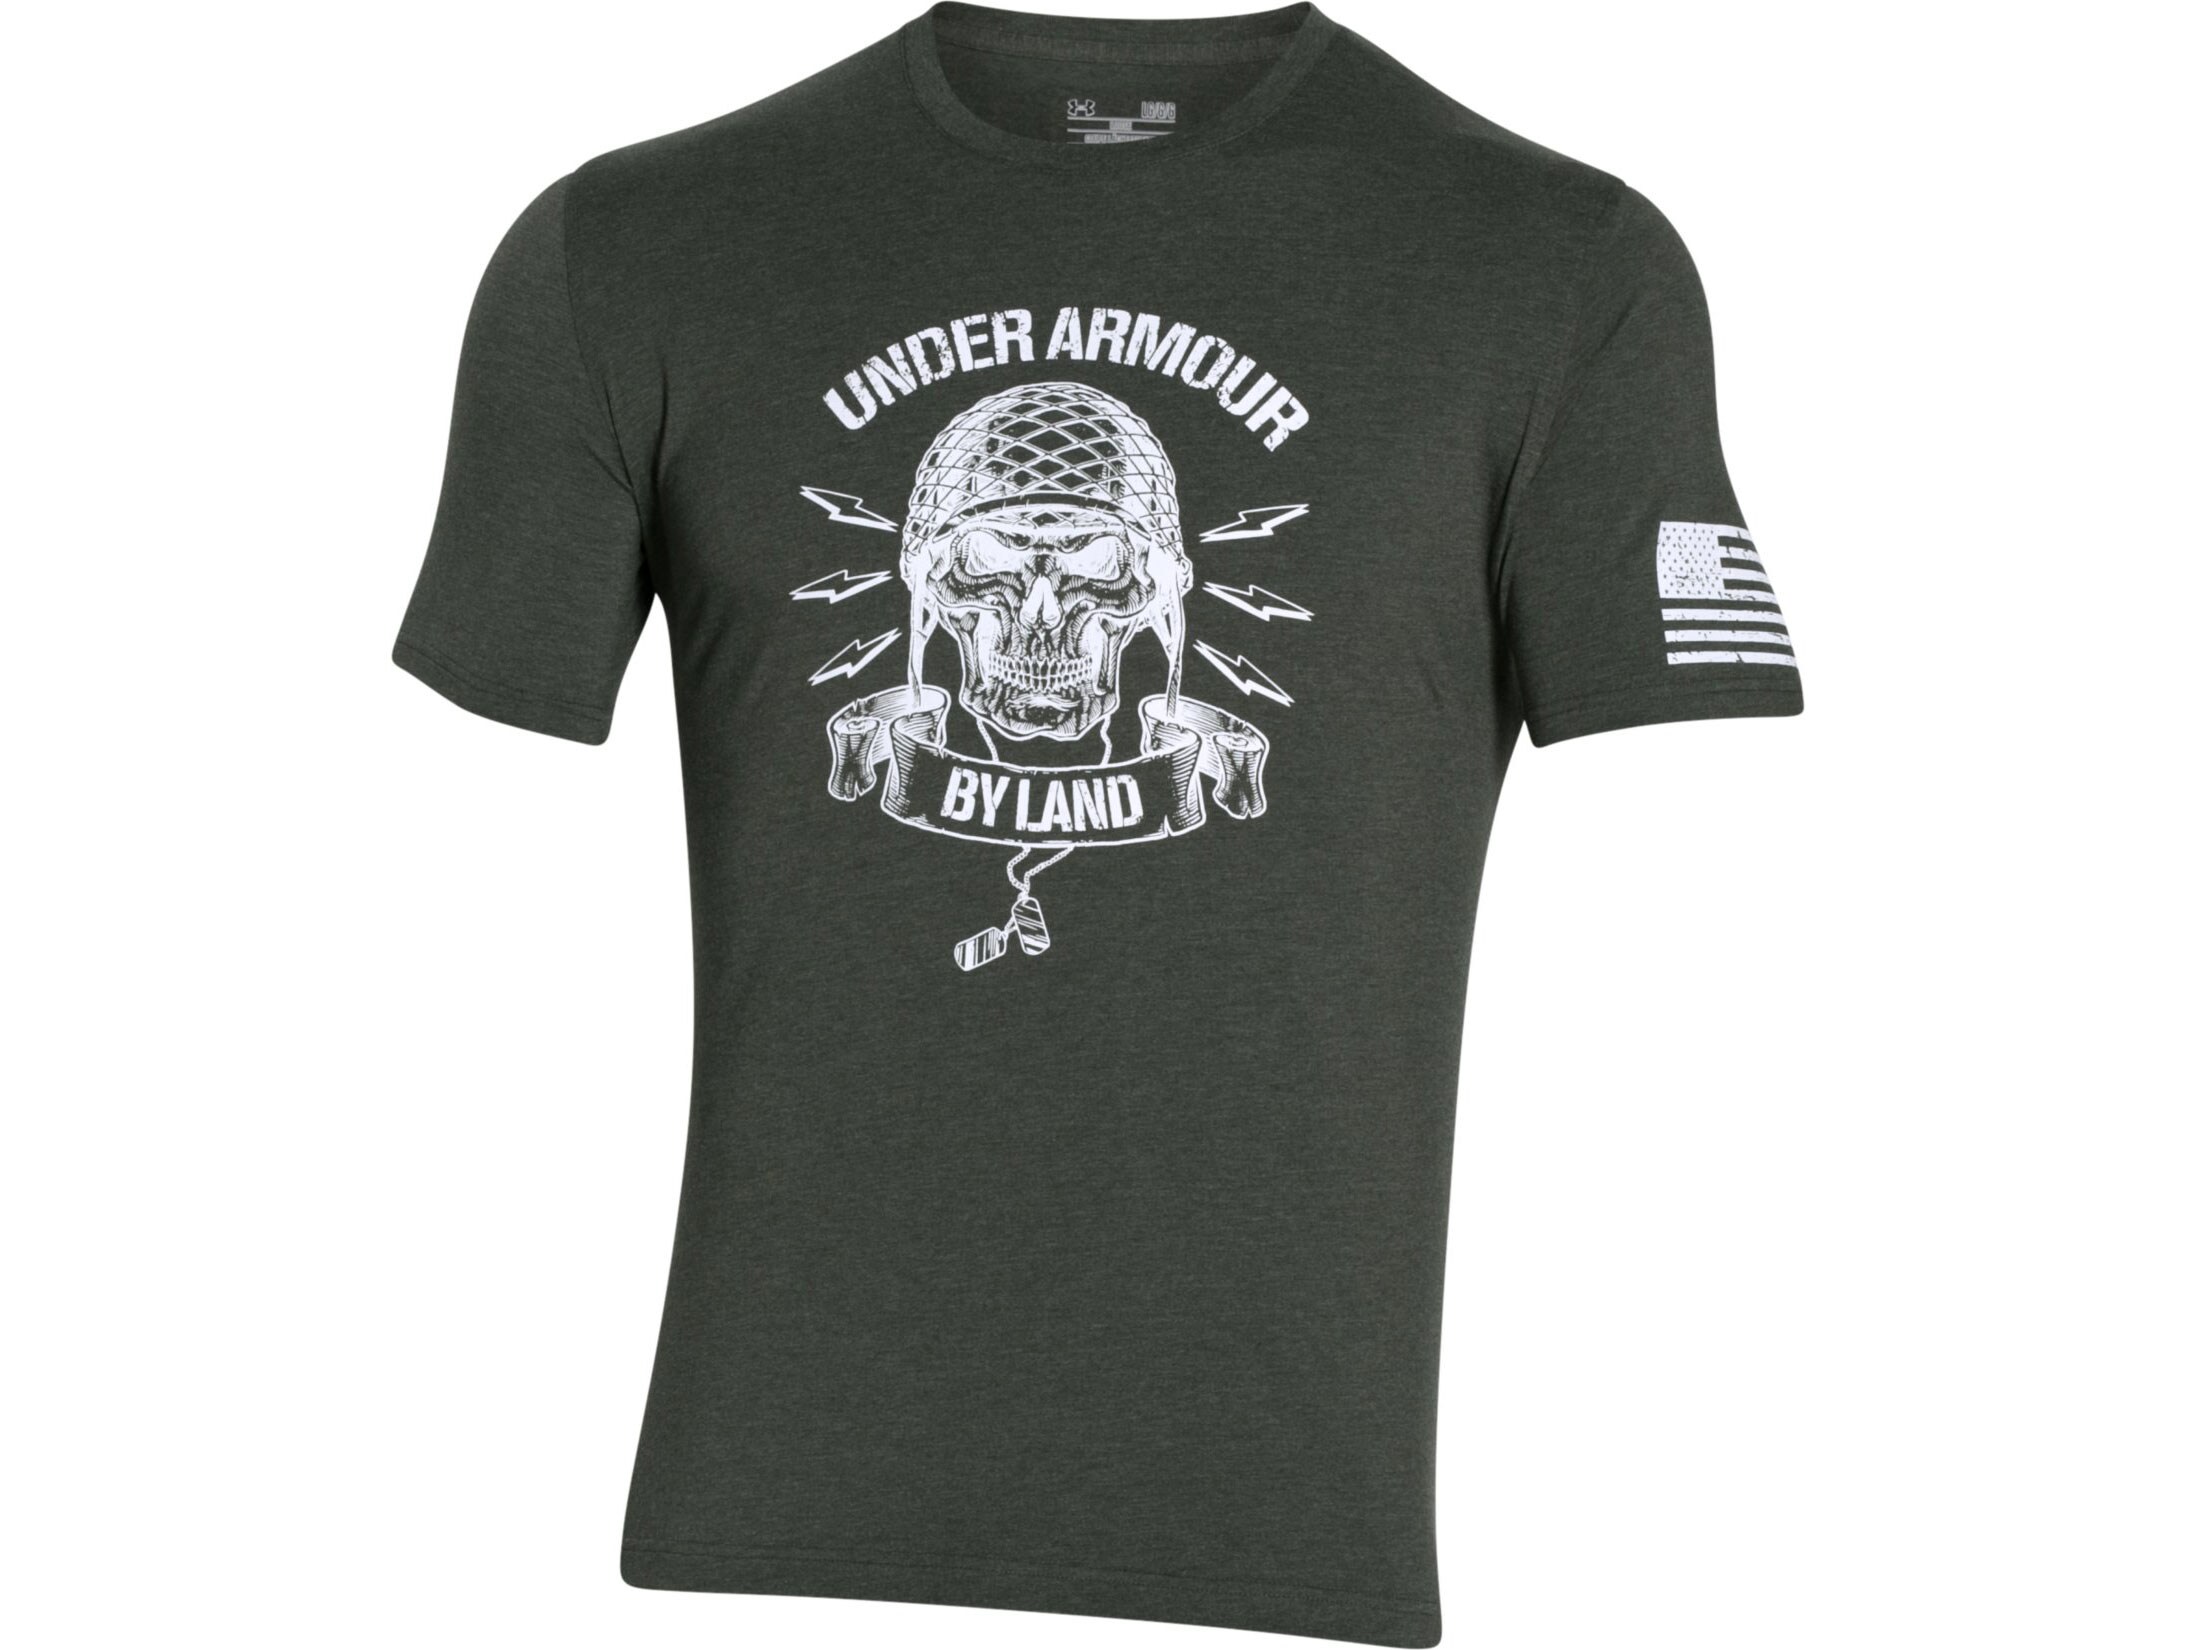 under armour by land t shirt